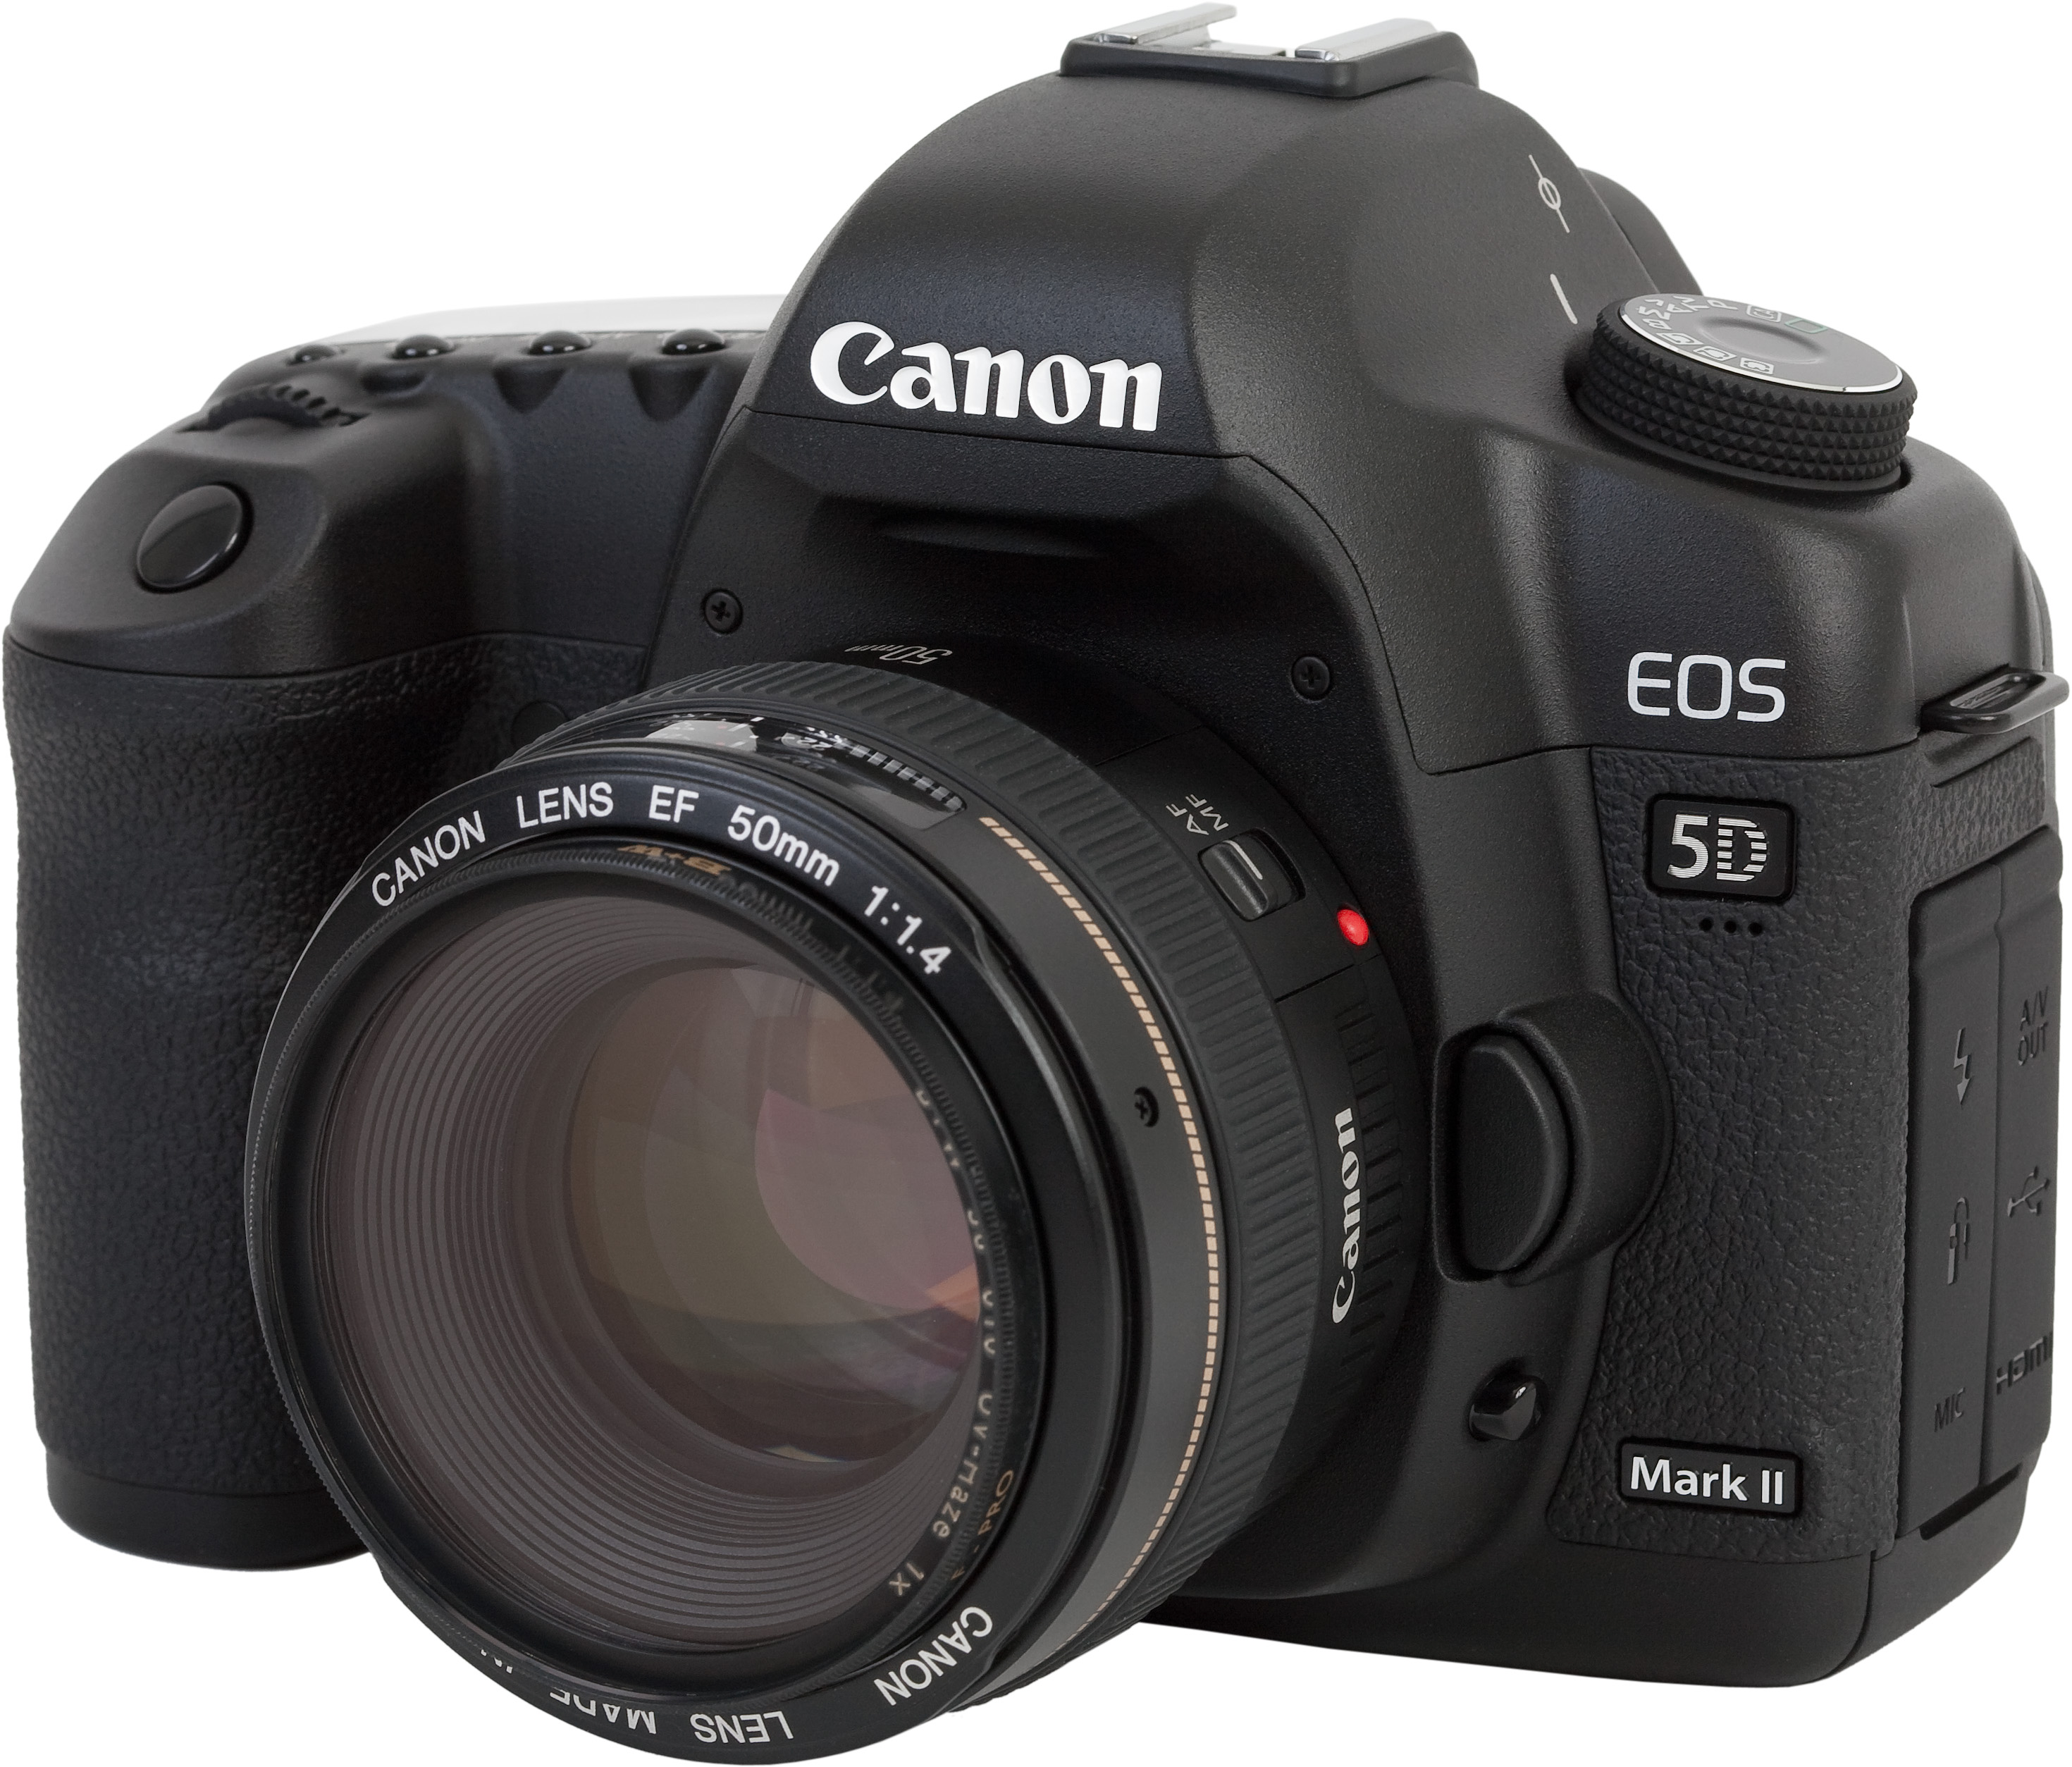 Canon EOS 5D Mark II with 50mm 1.4